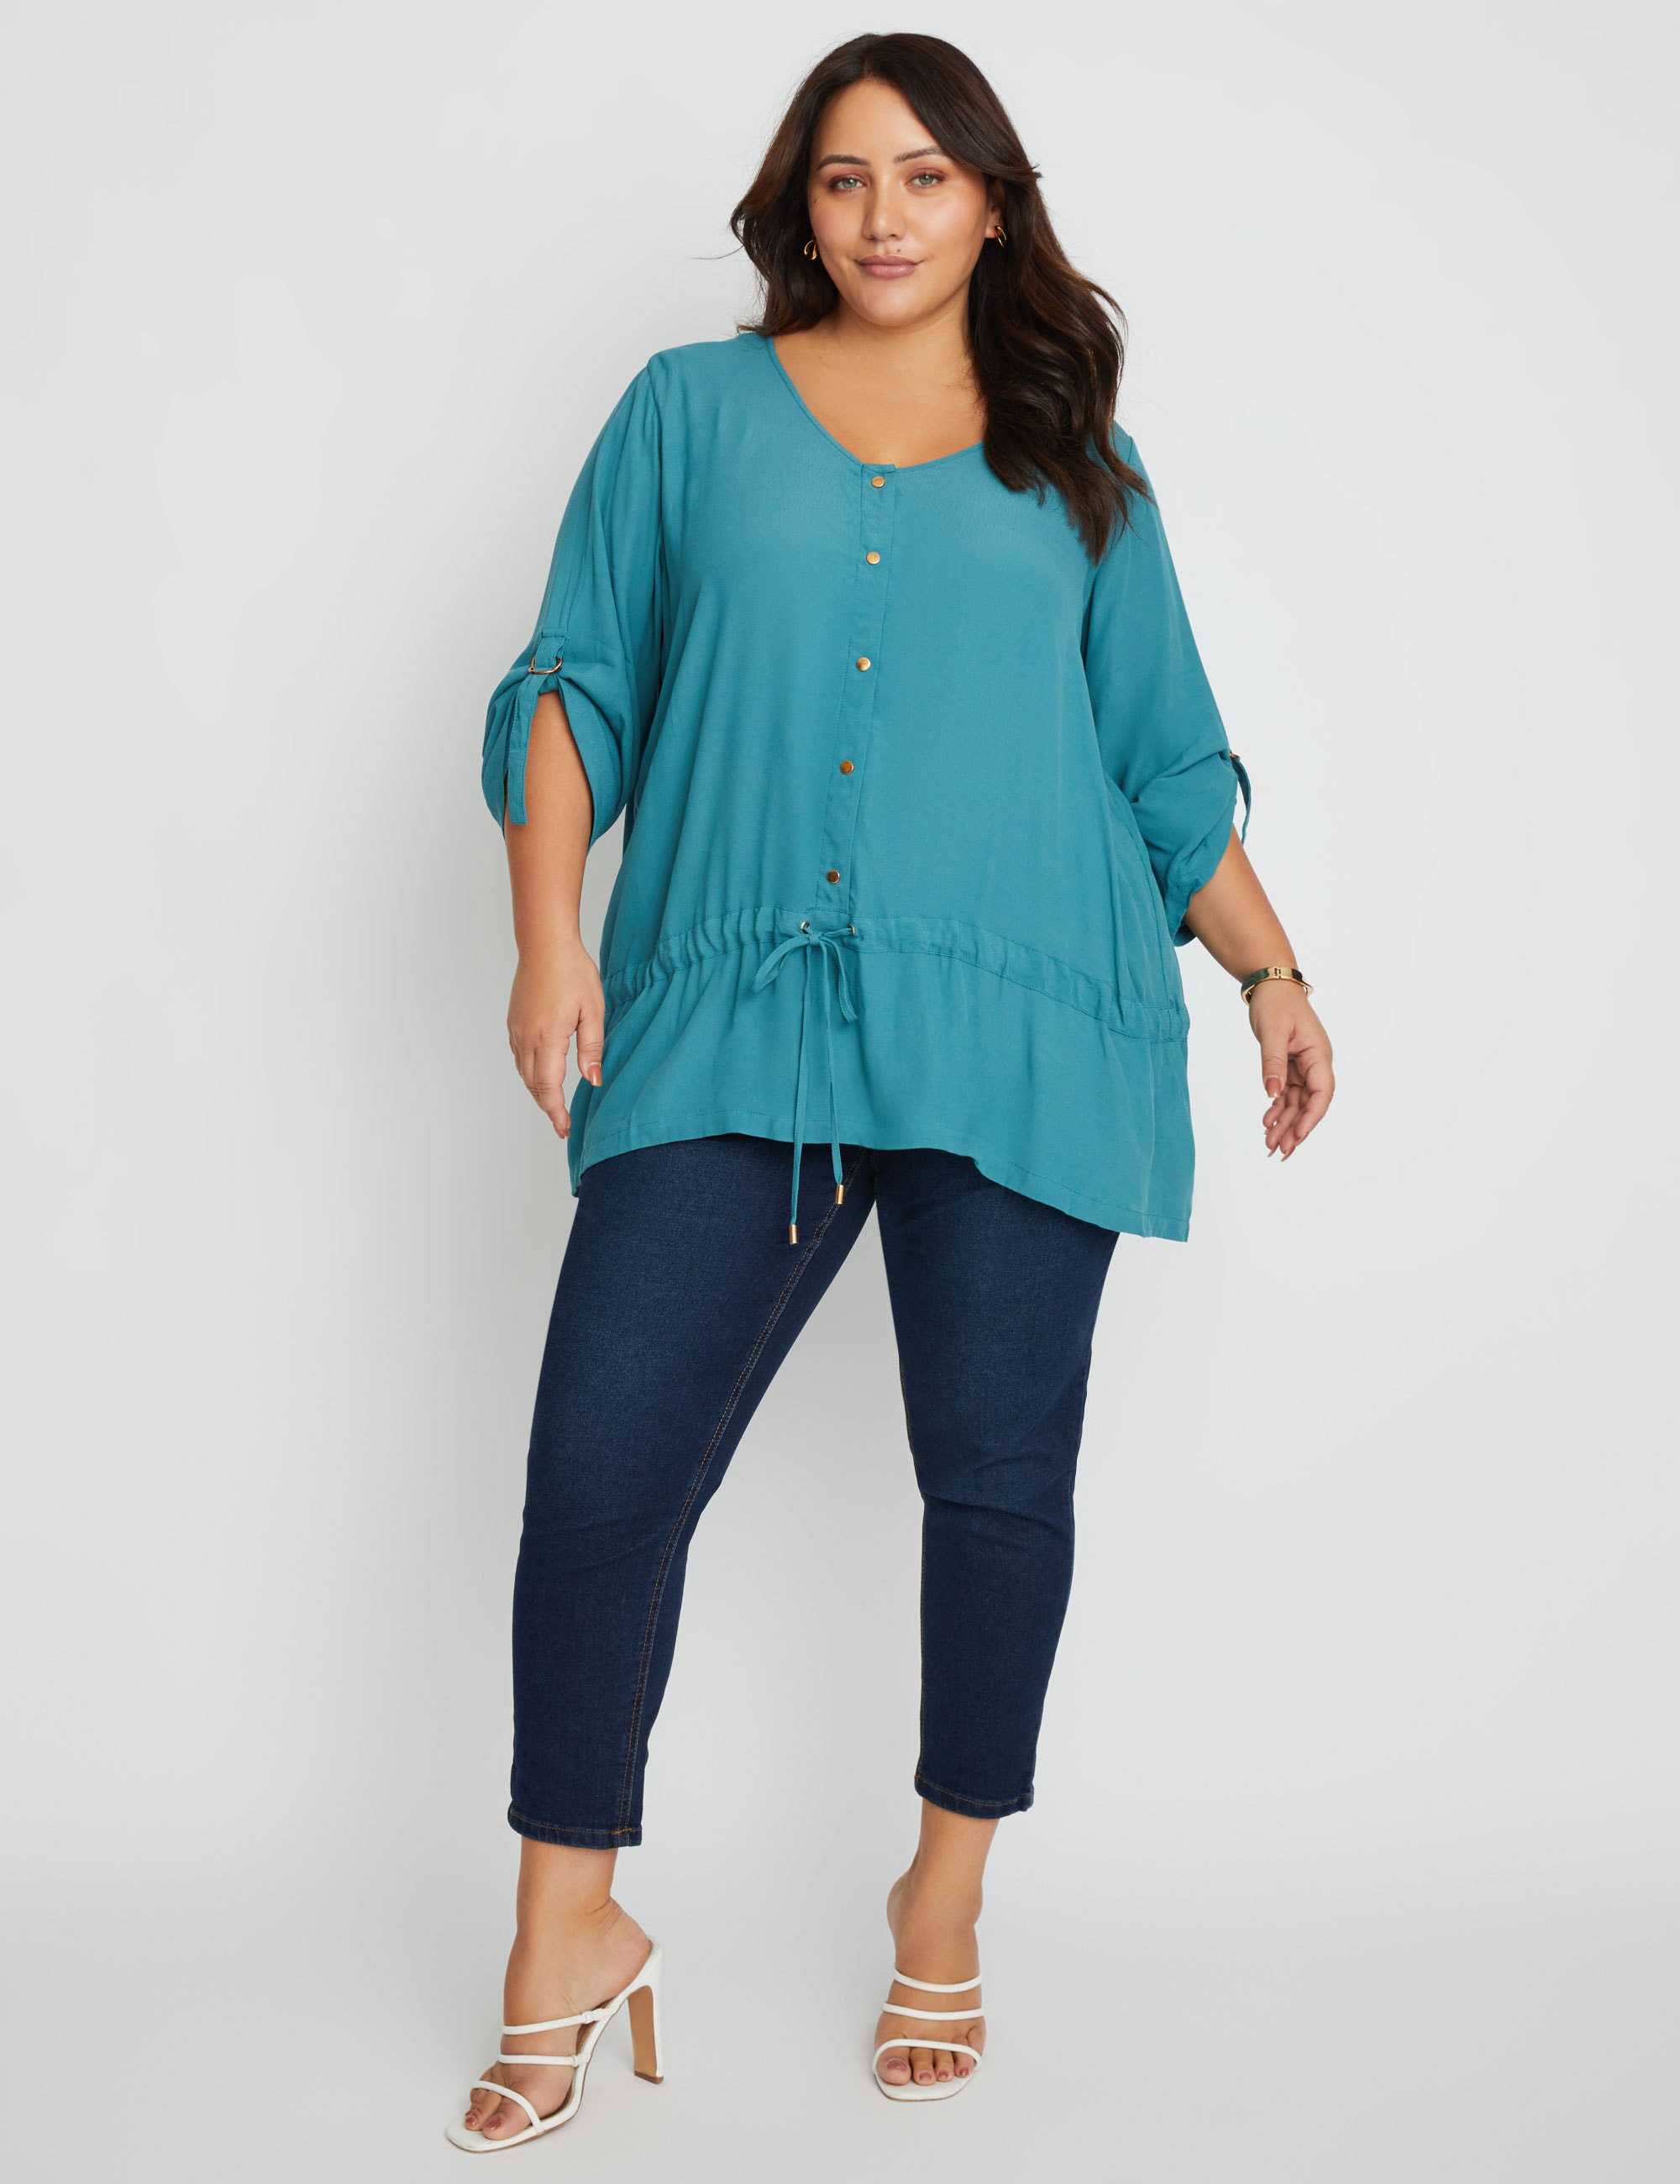 BeMe - Plus Size - Womens Tops - Extended Sleeve Woven Asymetric Shirt 